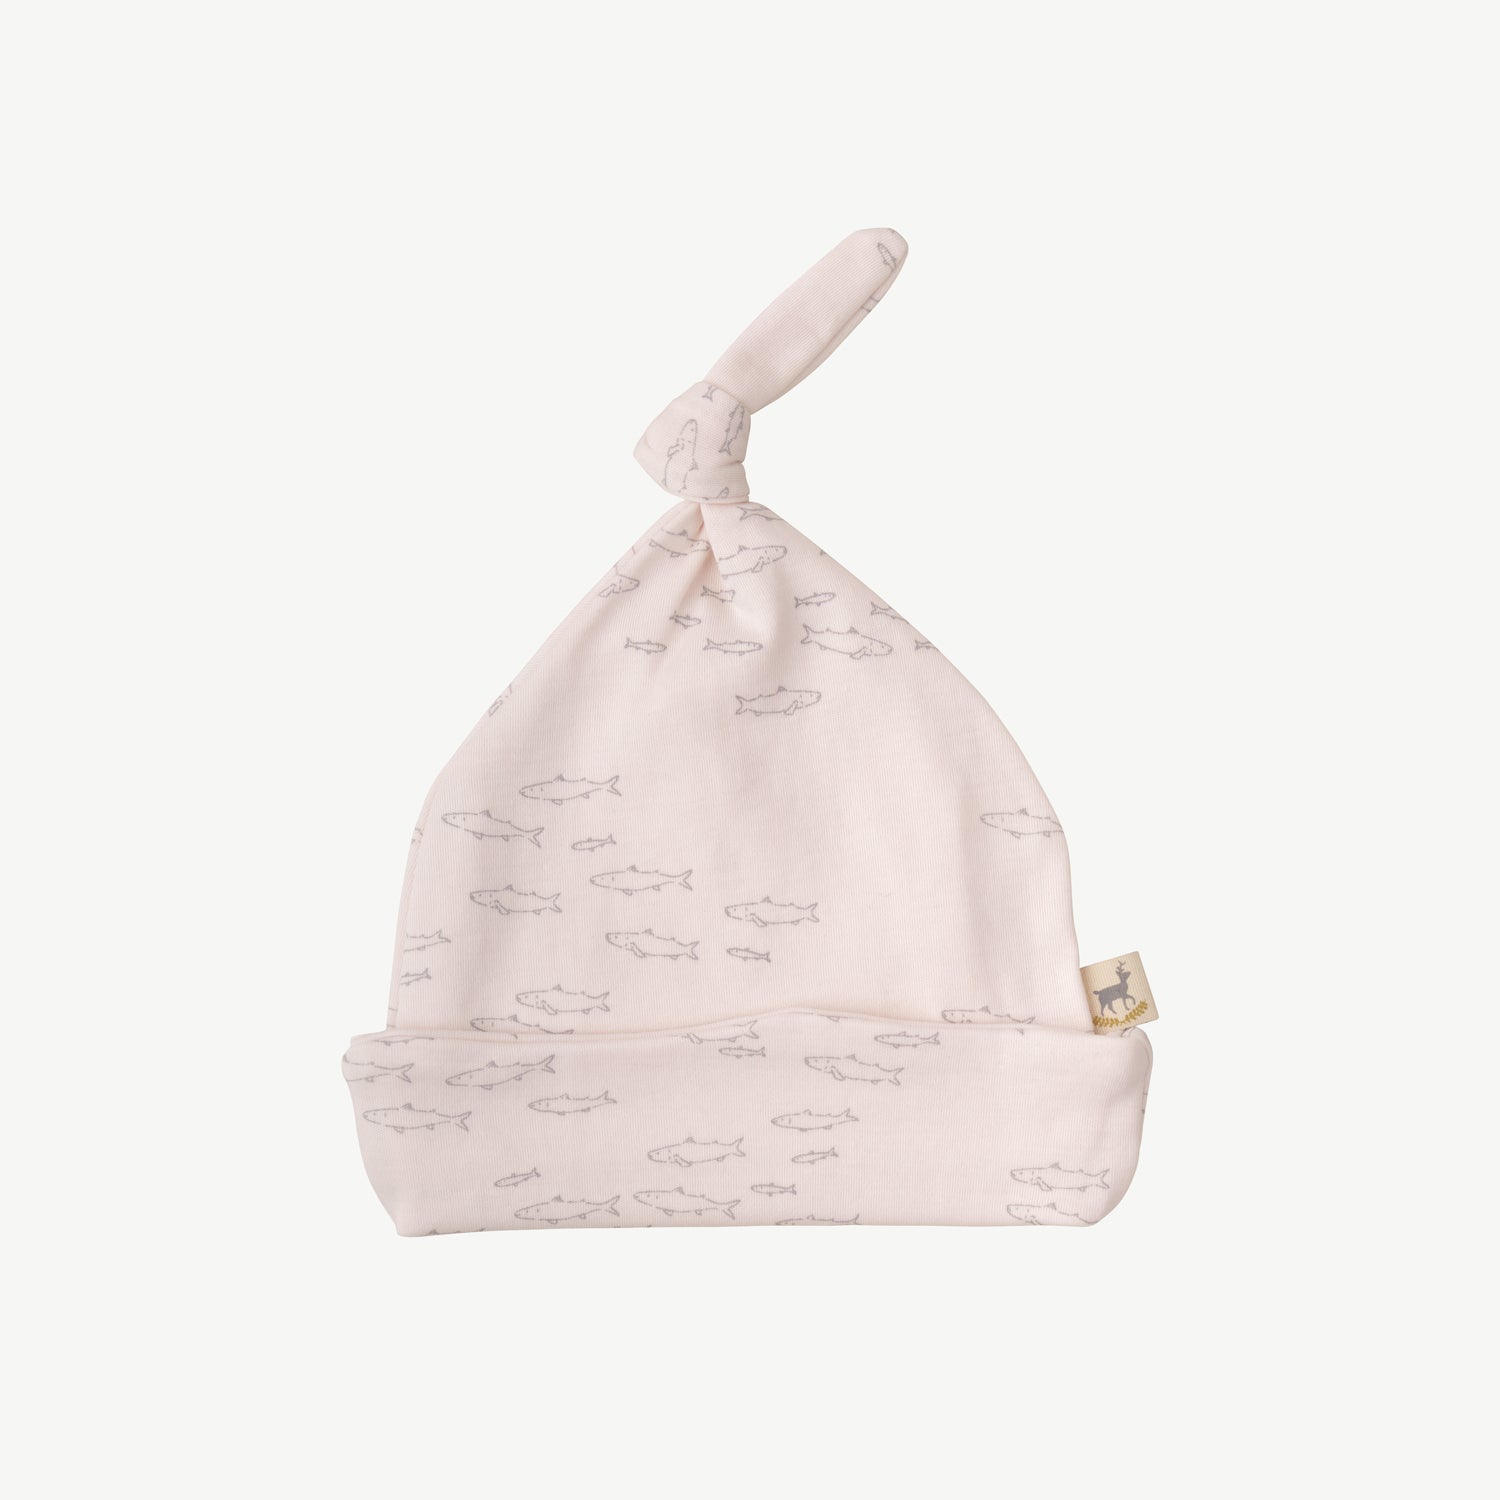 'schooling fish' heavenly pink knotted beanie